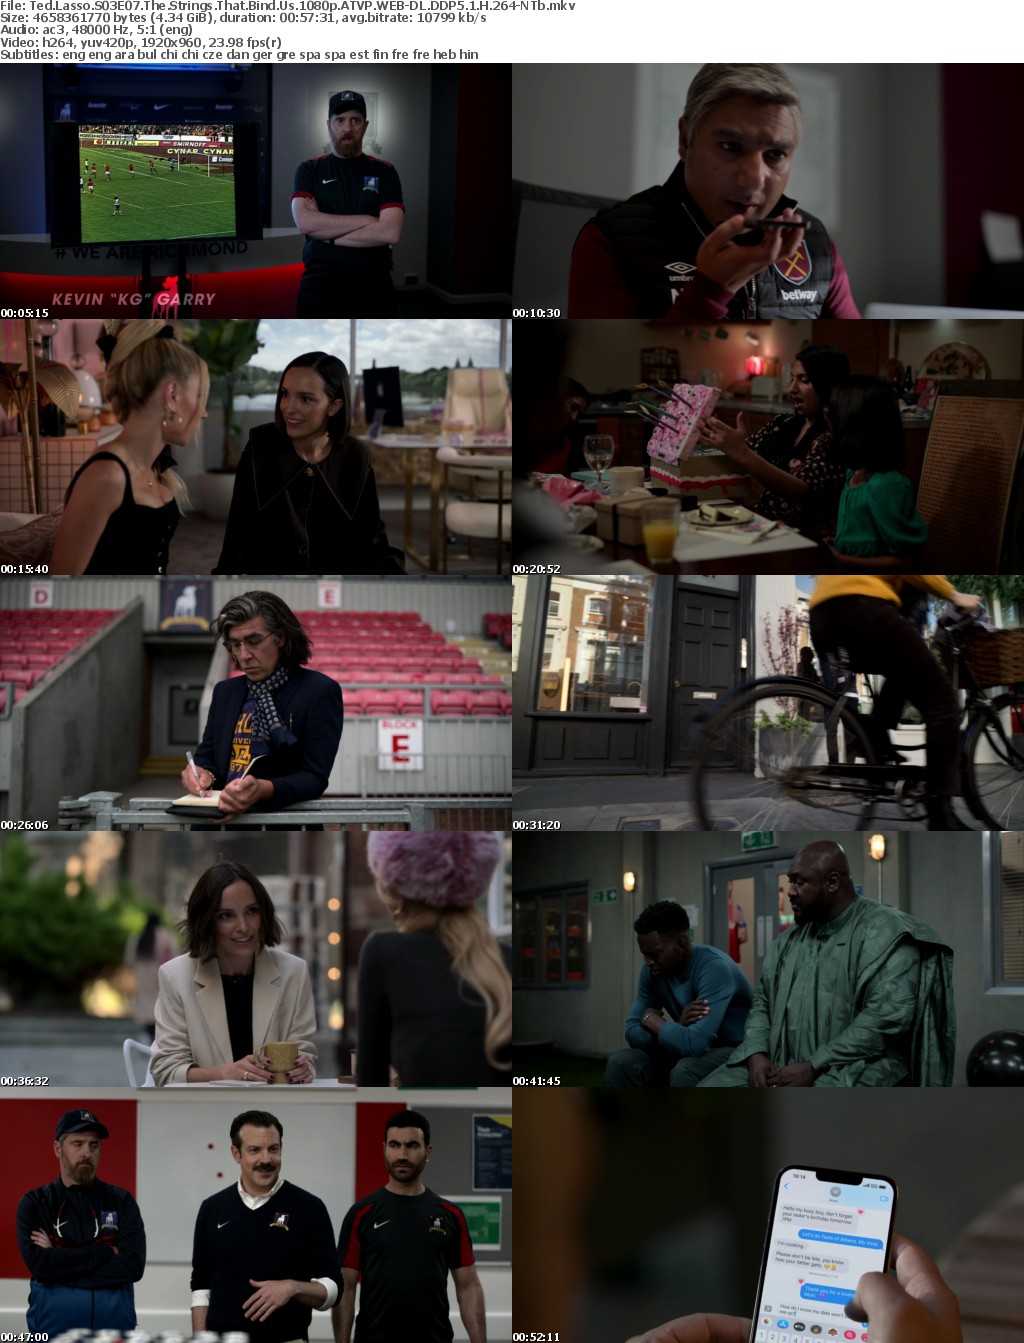 Ted Lasso S03E07 The Strings That Bind Us 1080p ATVP WEBRip DDP5 1 x264-NTb